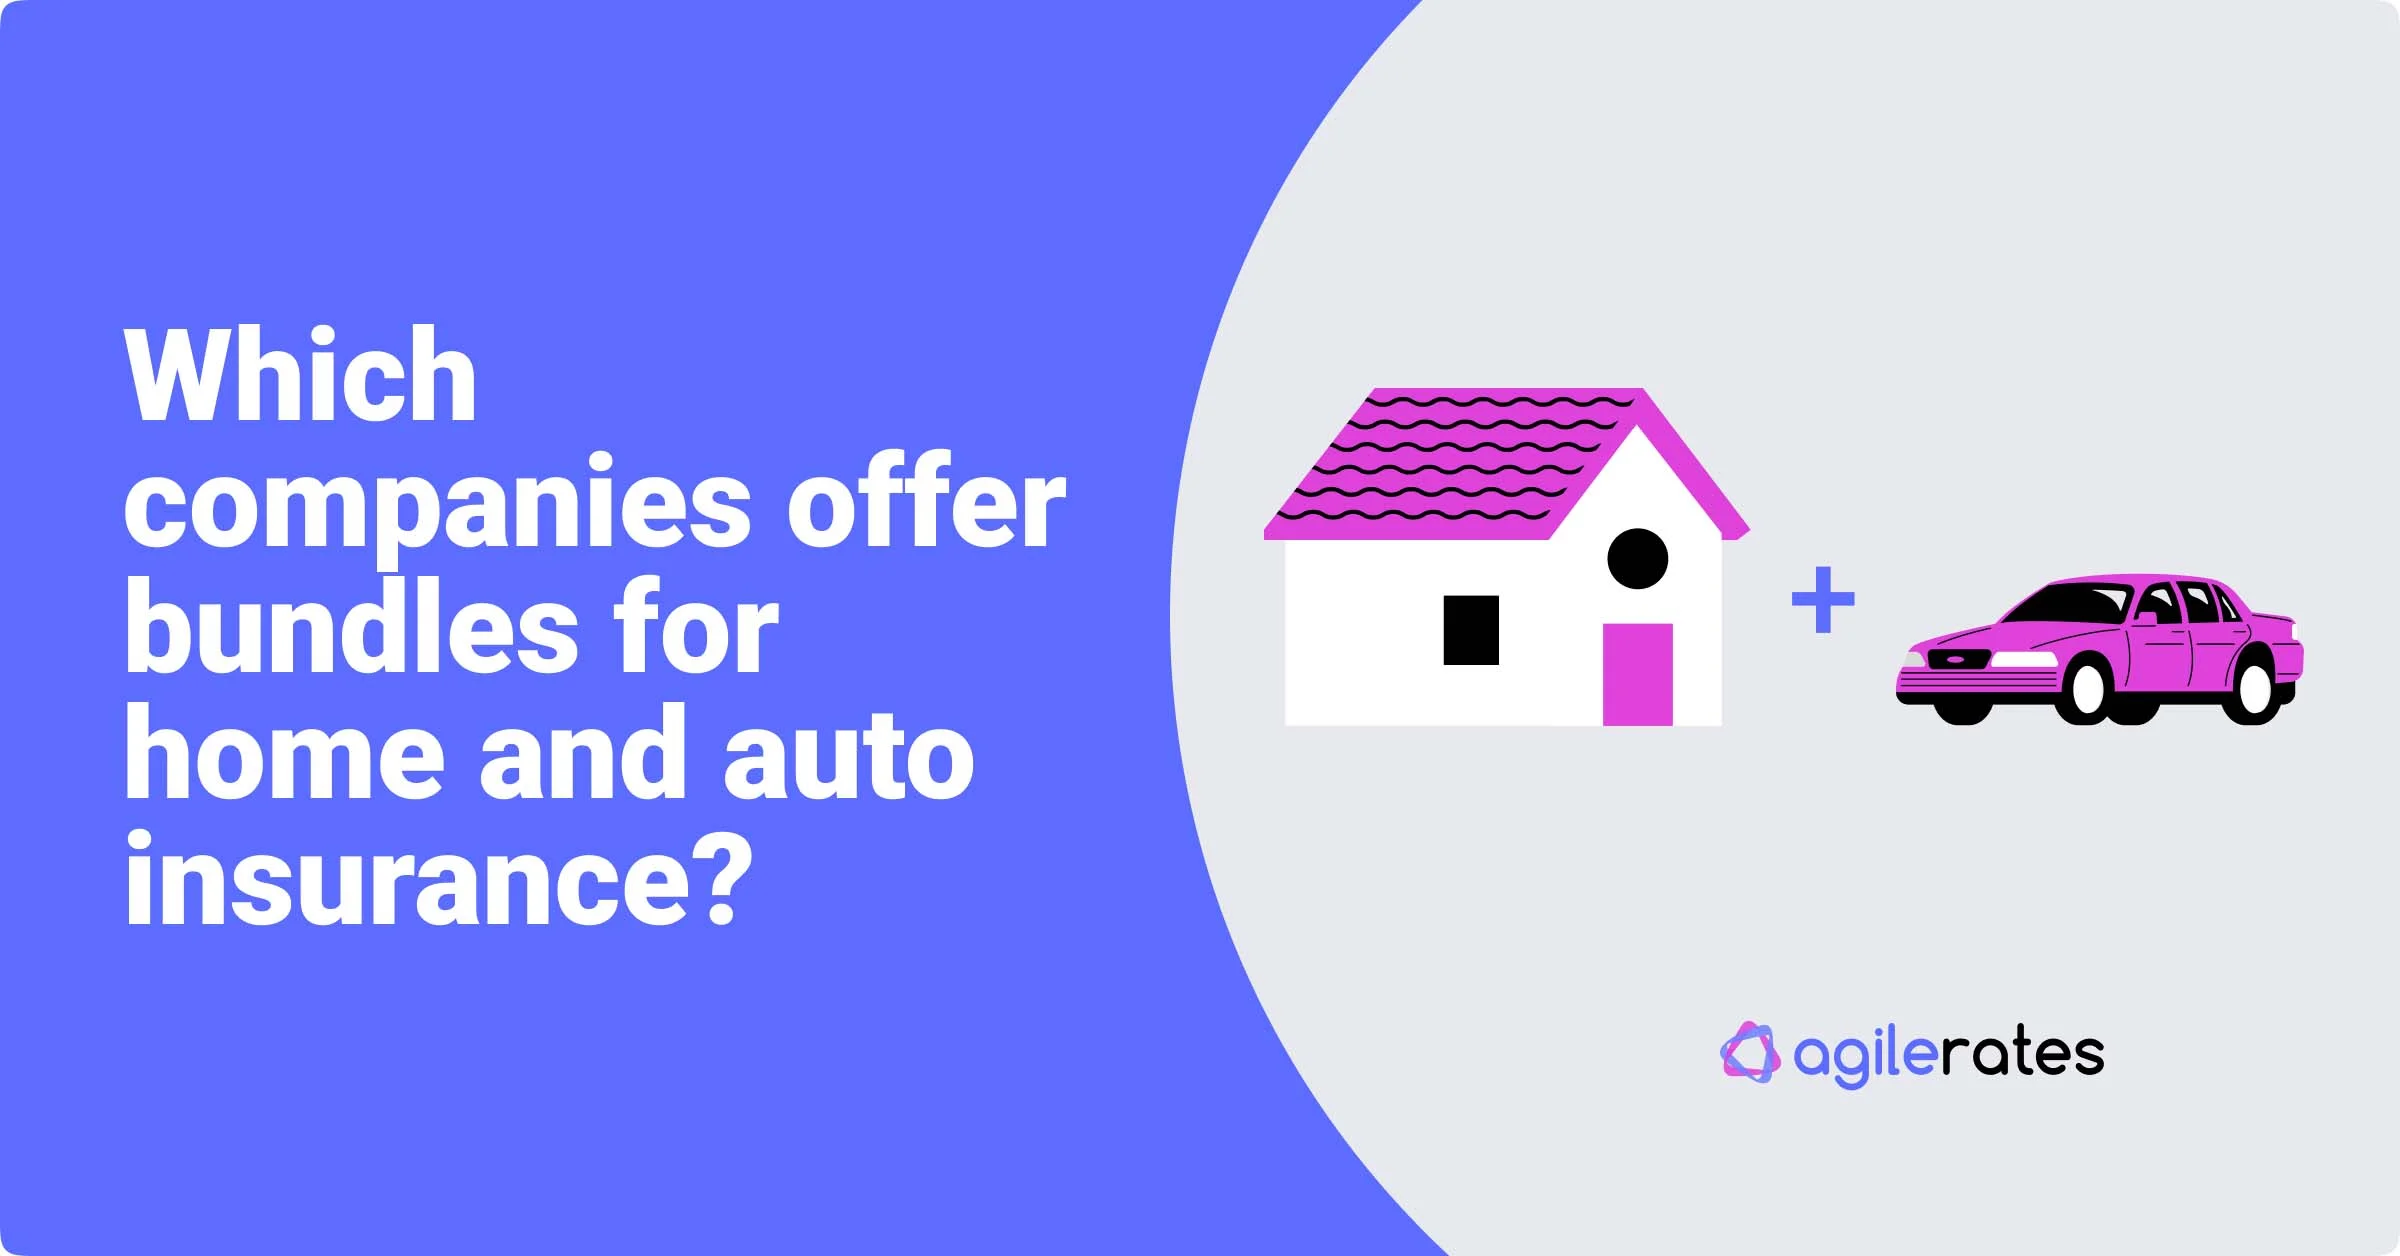 which companies offer bundles for home and auto insurance